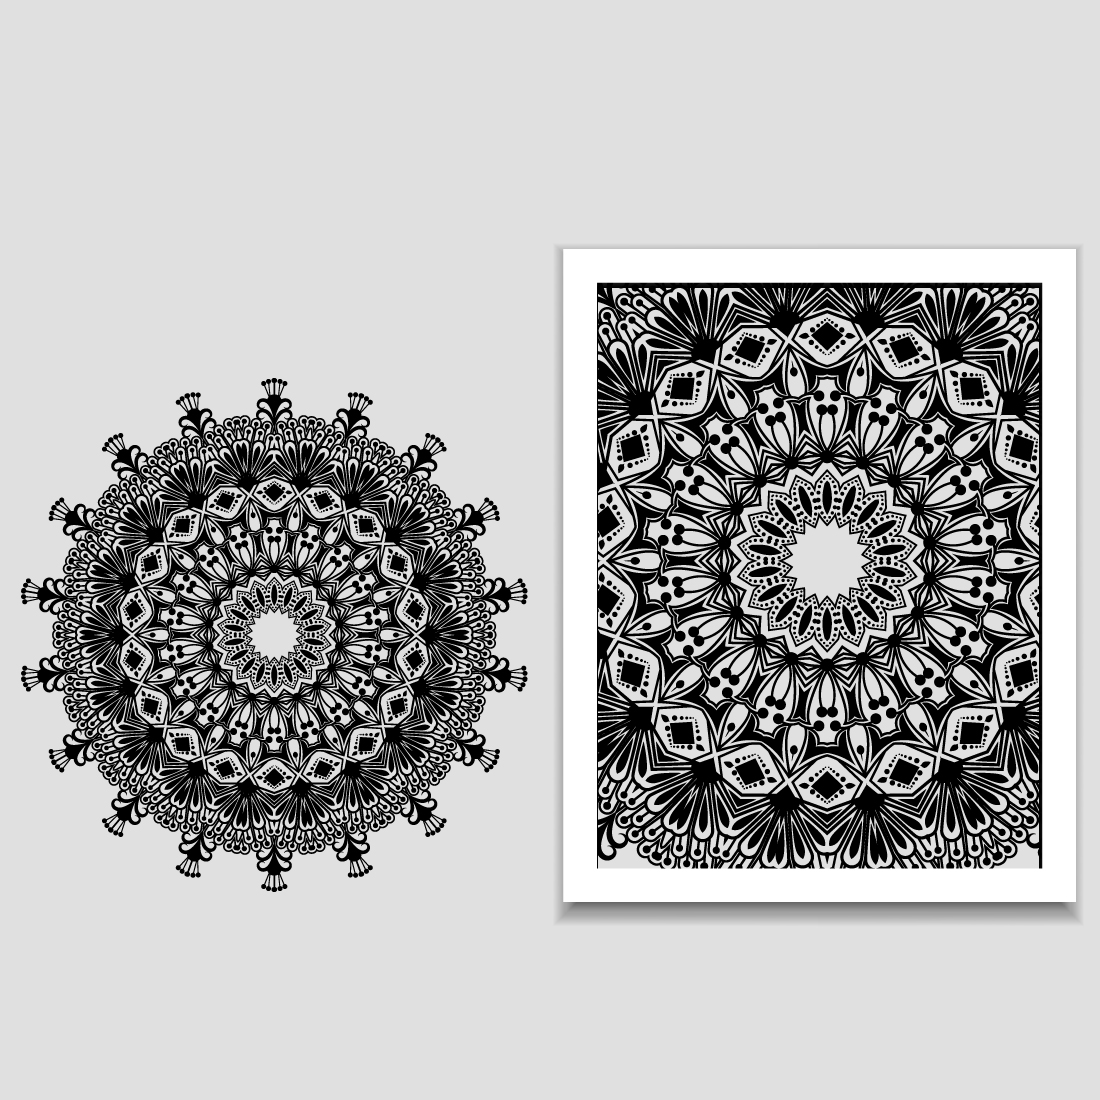 Abstract Design Of Mandala In Dot Paint Style Ethnic Round Ornament.